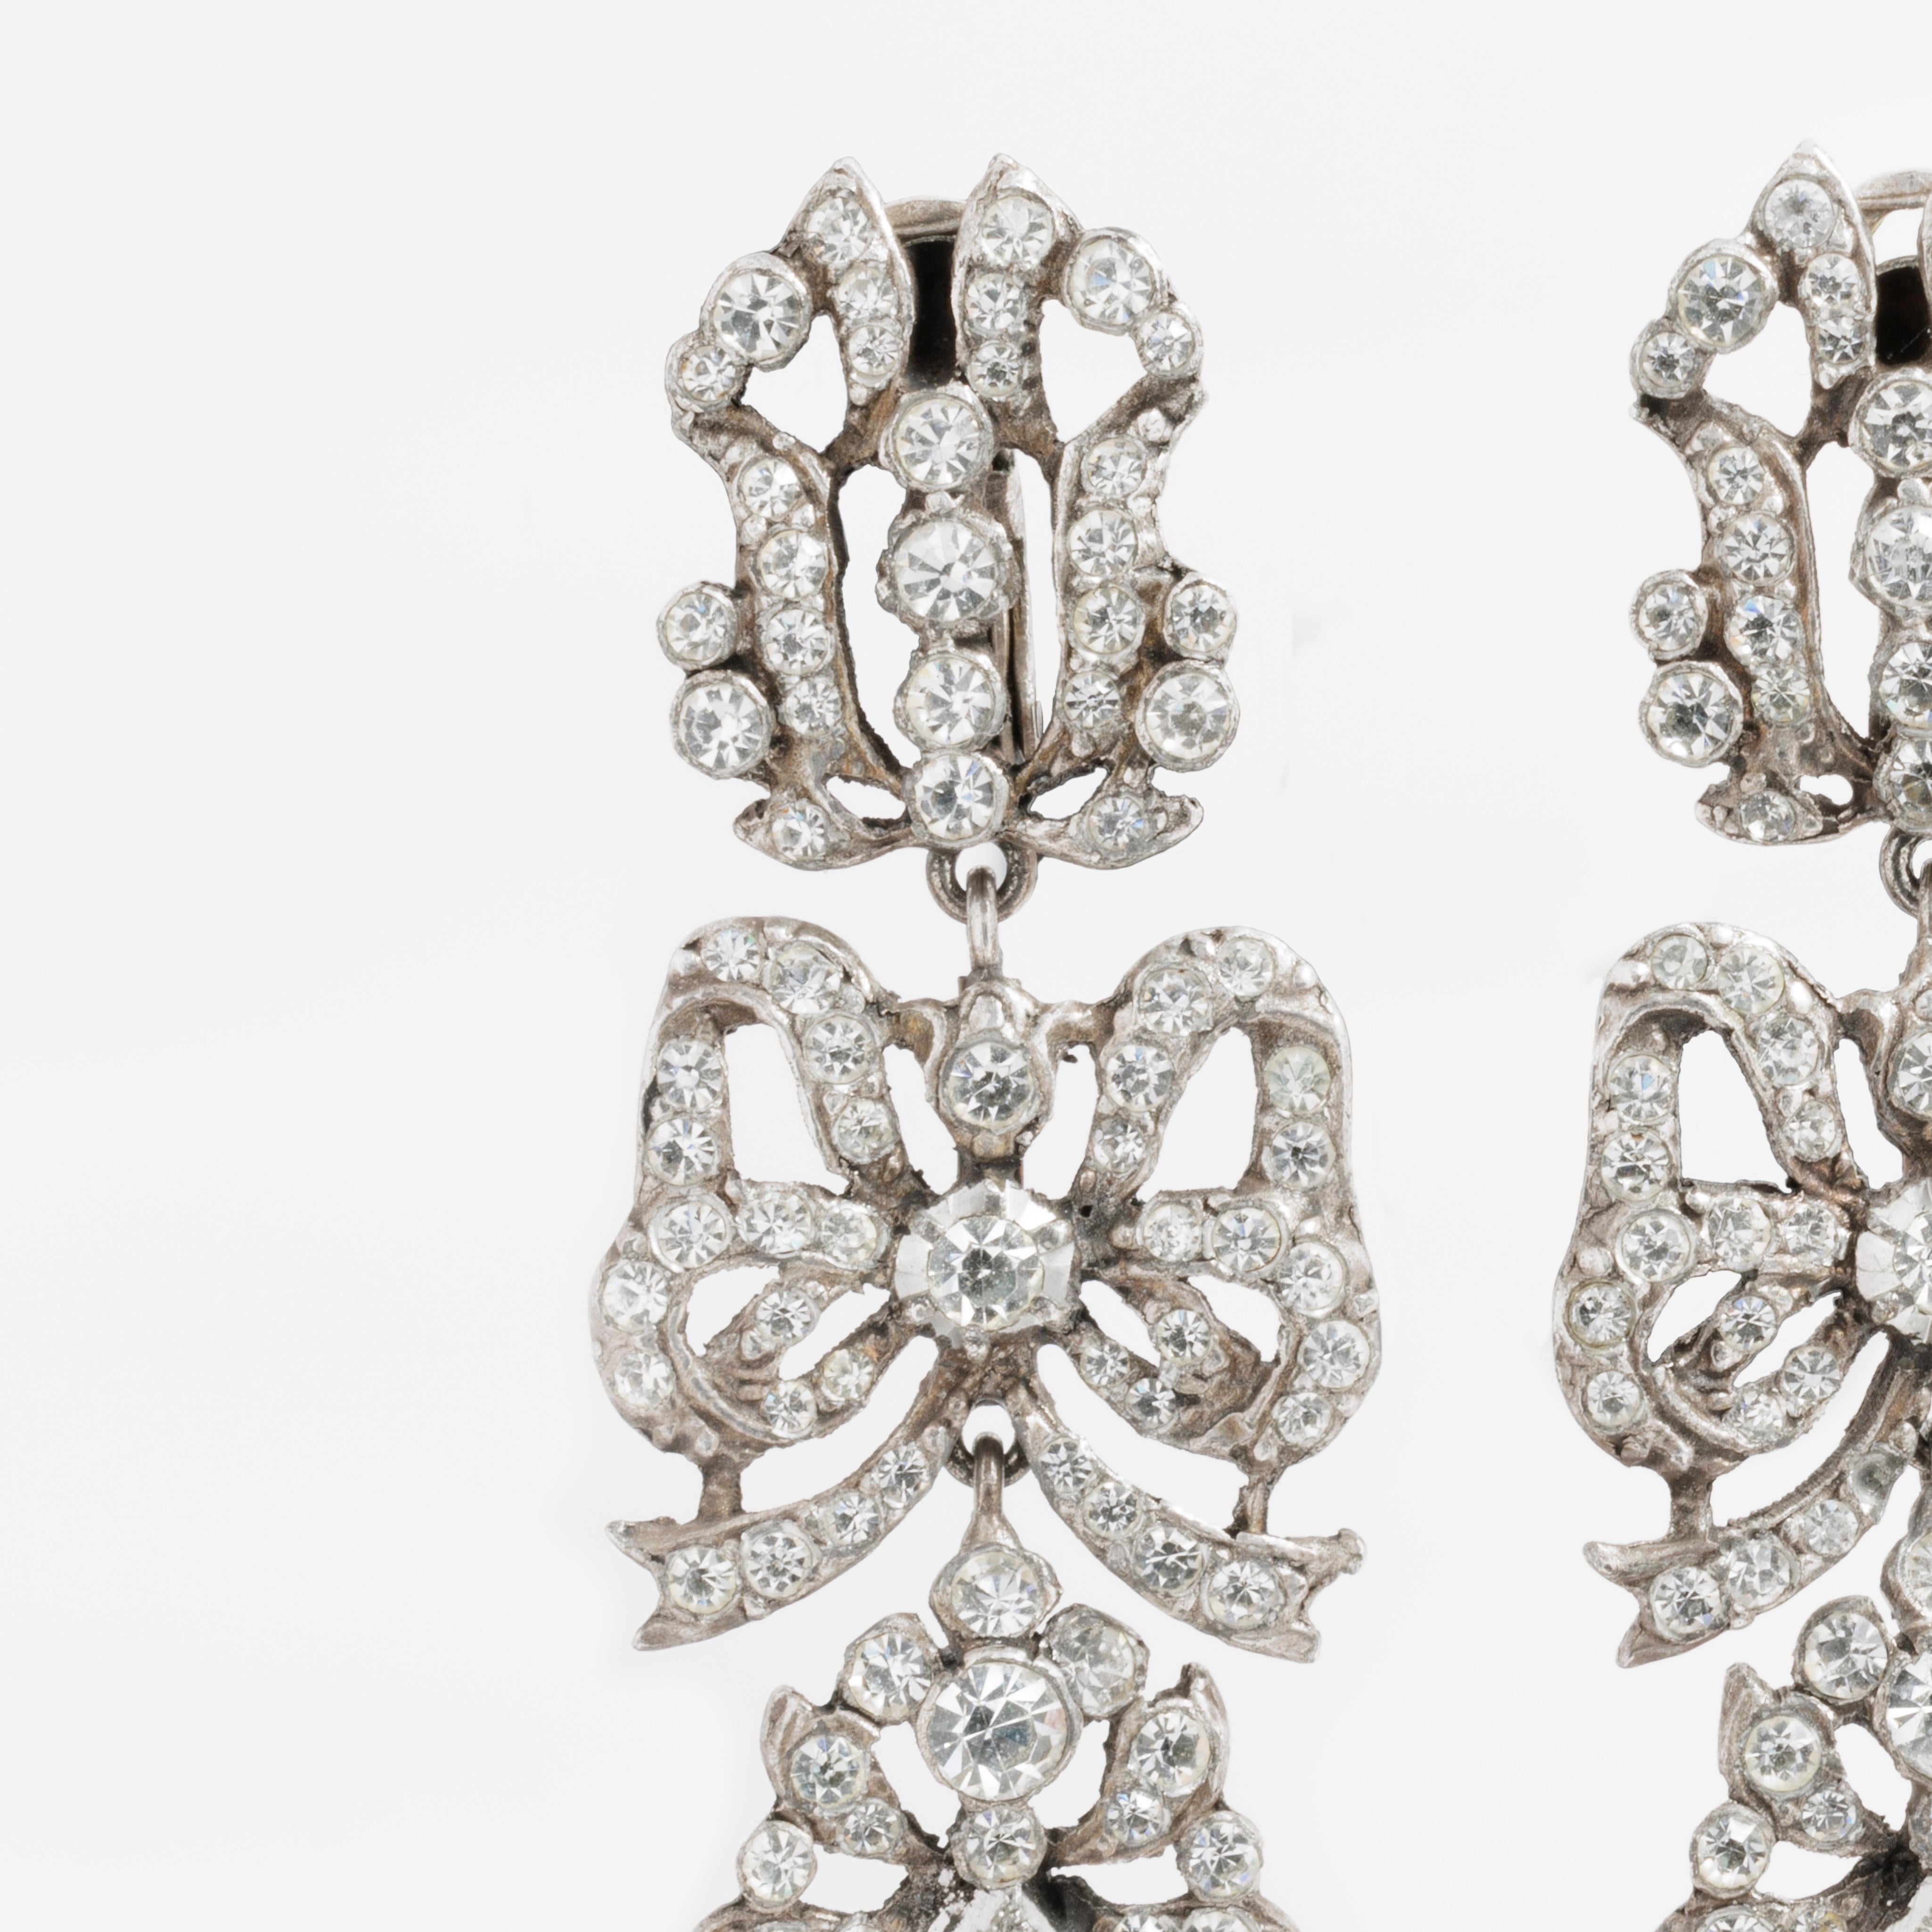 Belle Époque French 19th Century Silver and Clear Paste Pendeloque Chandelier Earrings For Sale